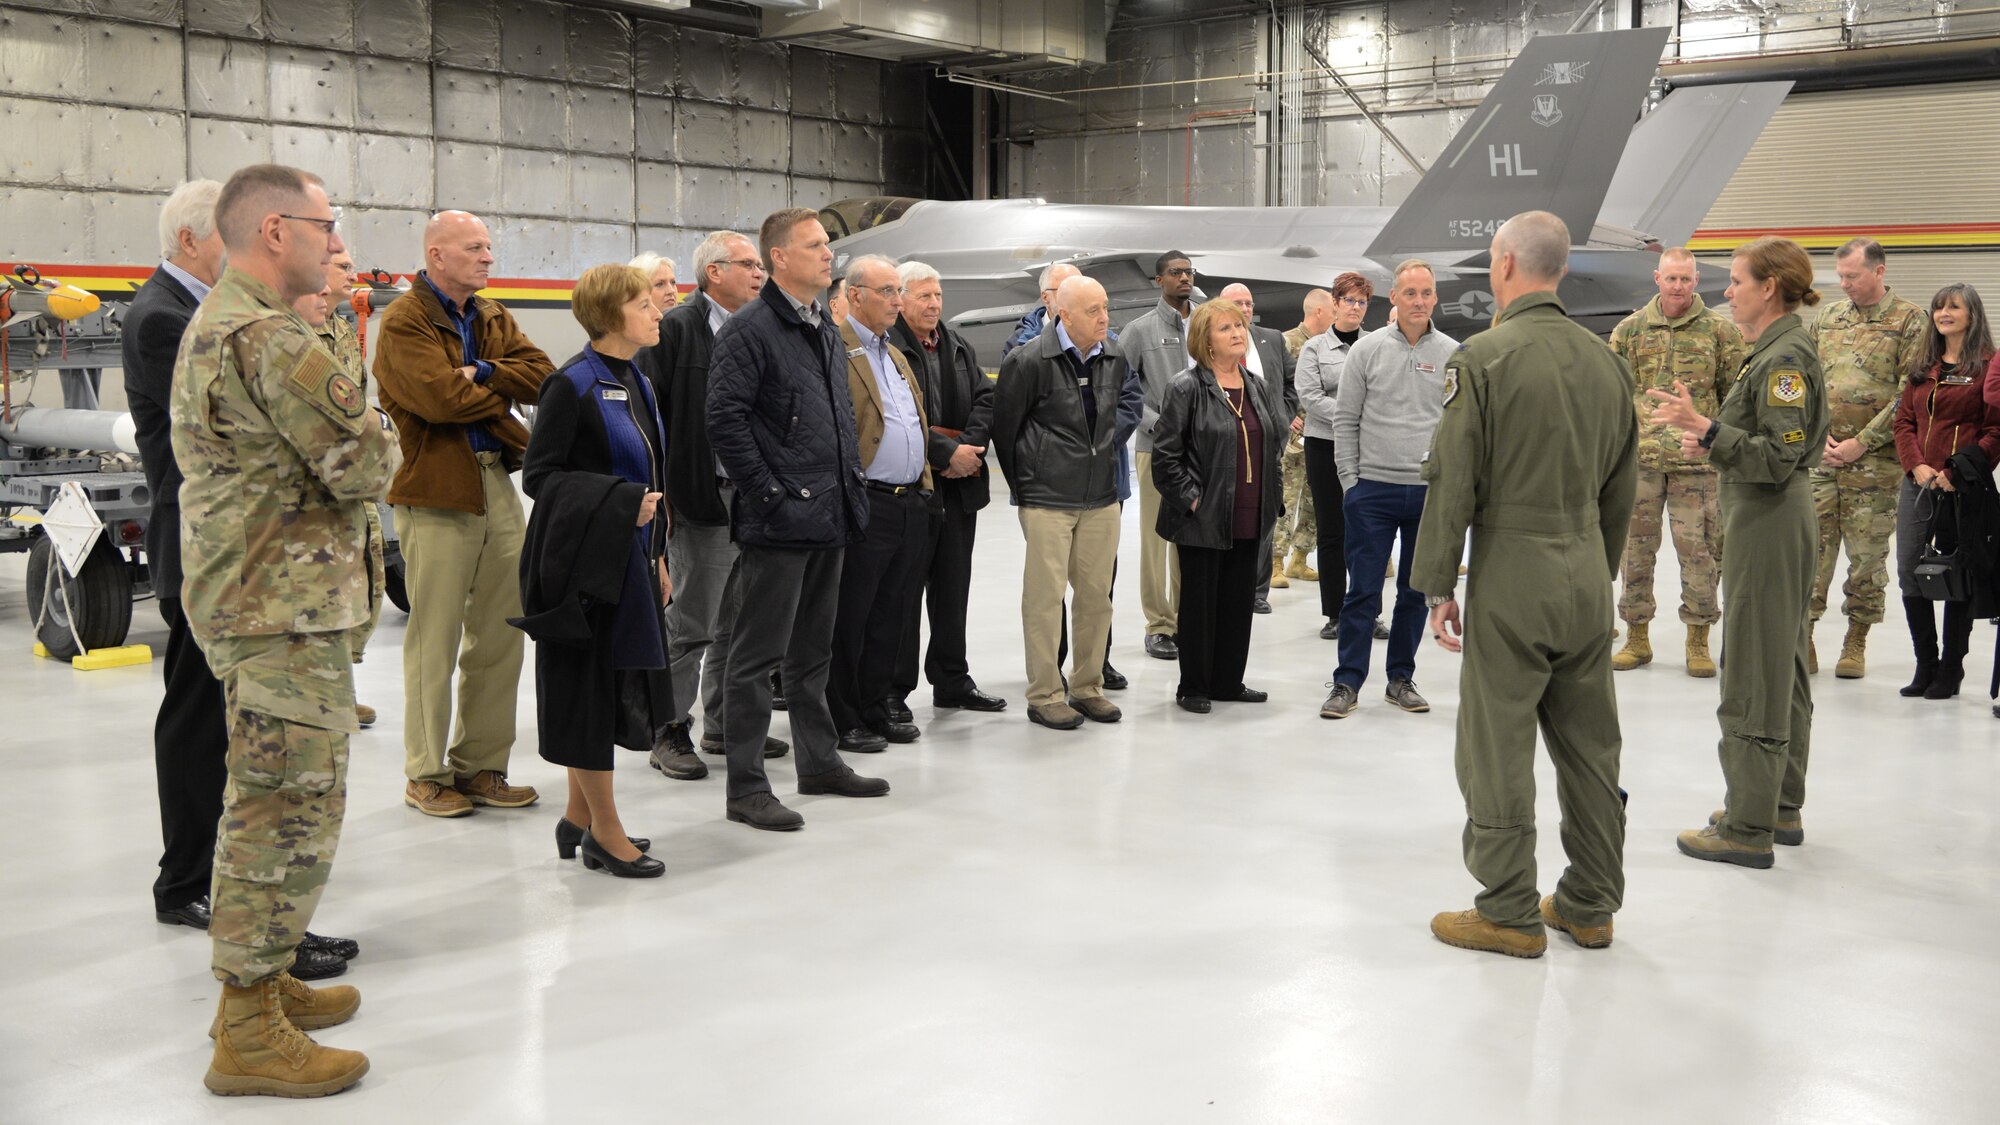 Community leaders from around the country during a base visit Oct. 21, 2019, at Hill Air Force Base, Utah. The group visited Hill as part of Air Force Materiel Command’s Civic Leader Program. The CLP members meet twice annually to hear updates on AFMC and Air Force issues. (U.S. Air Force photo by Cynthia Griggs)